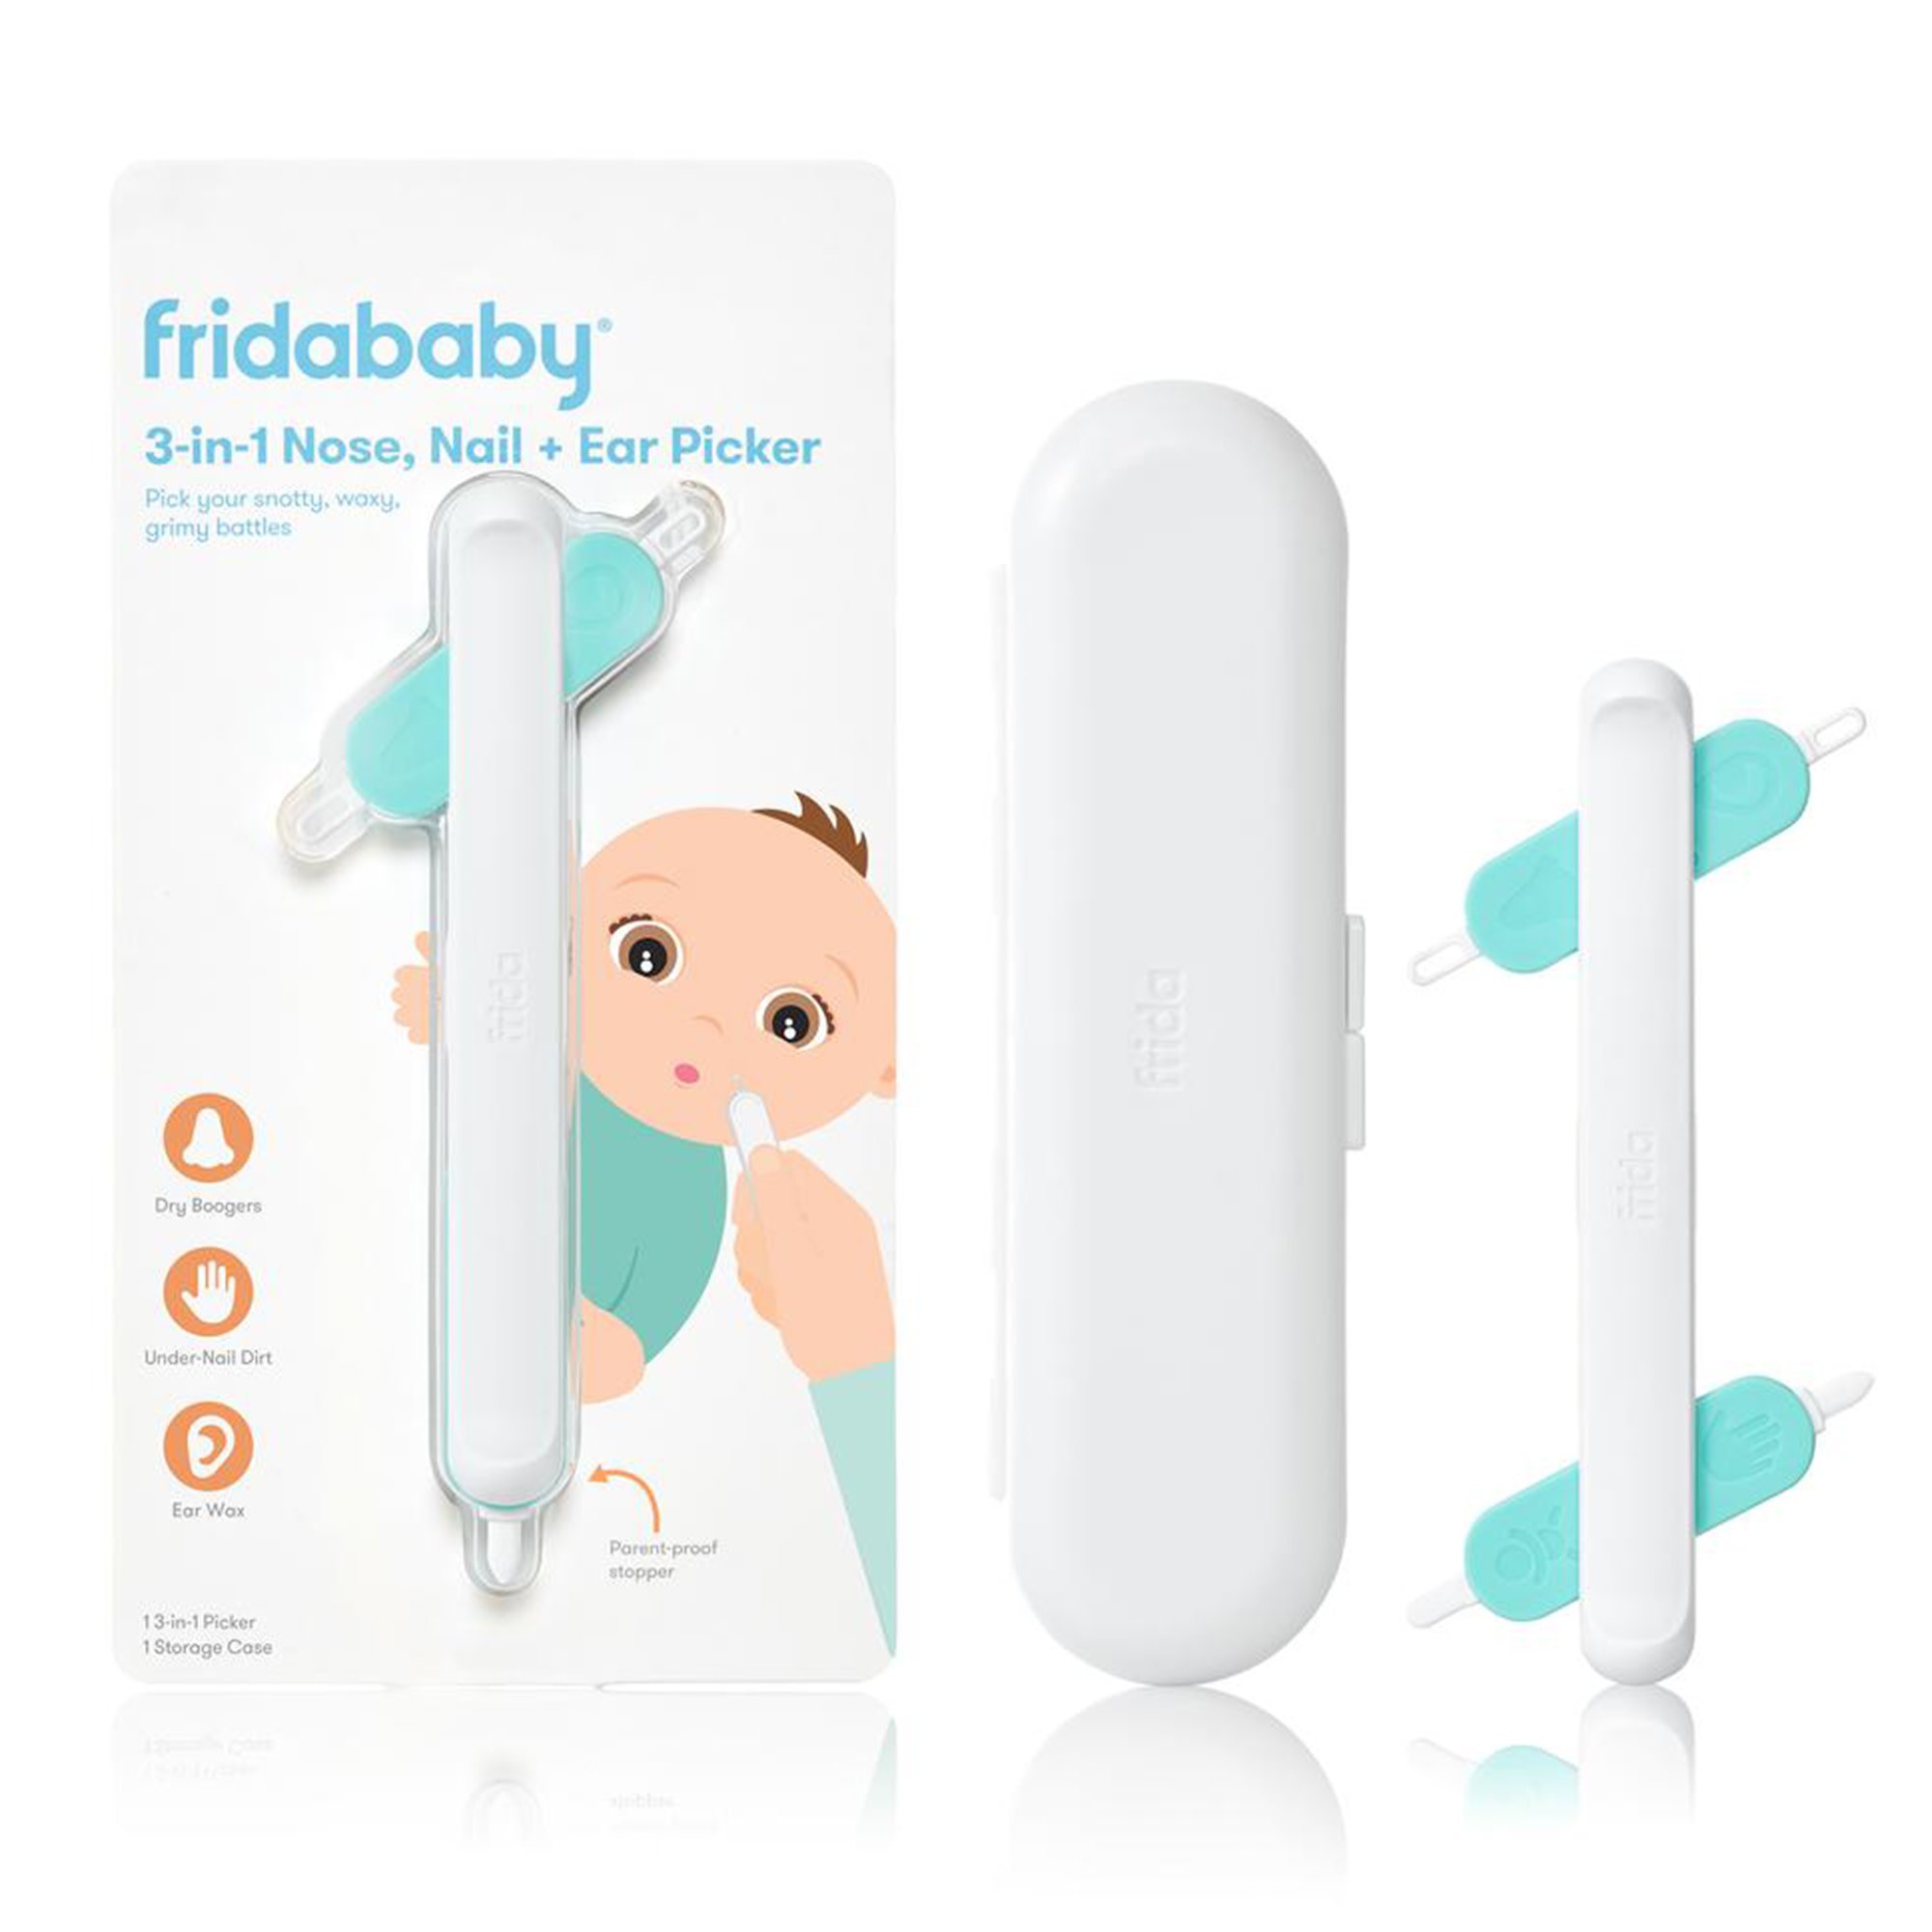 Fridababy 3-in-1 Nose, Nail, Ear Picker